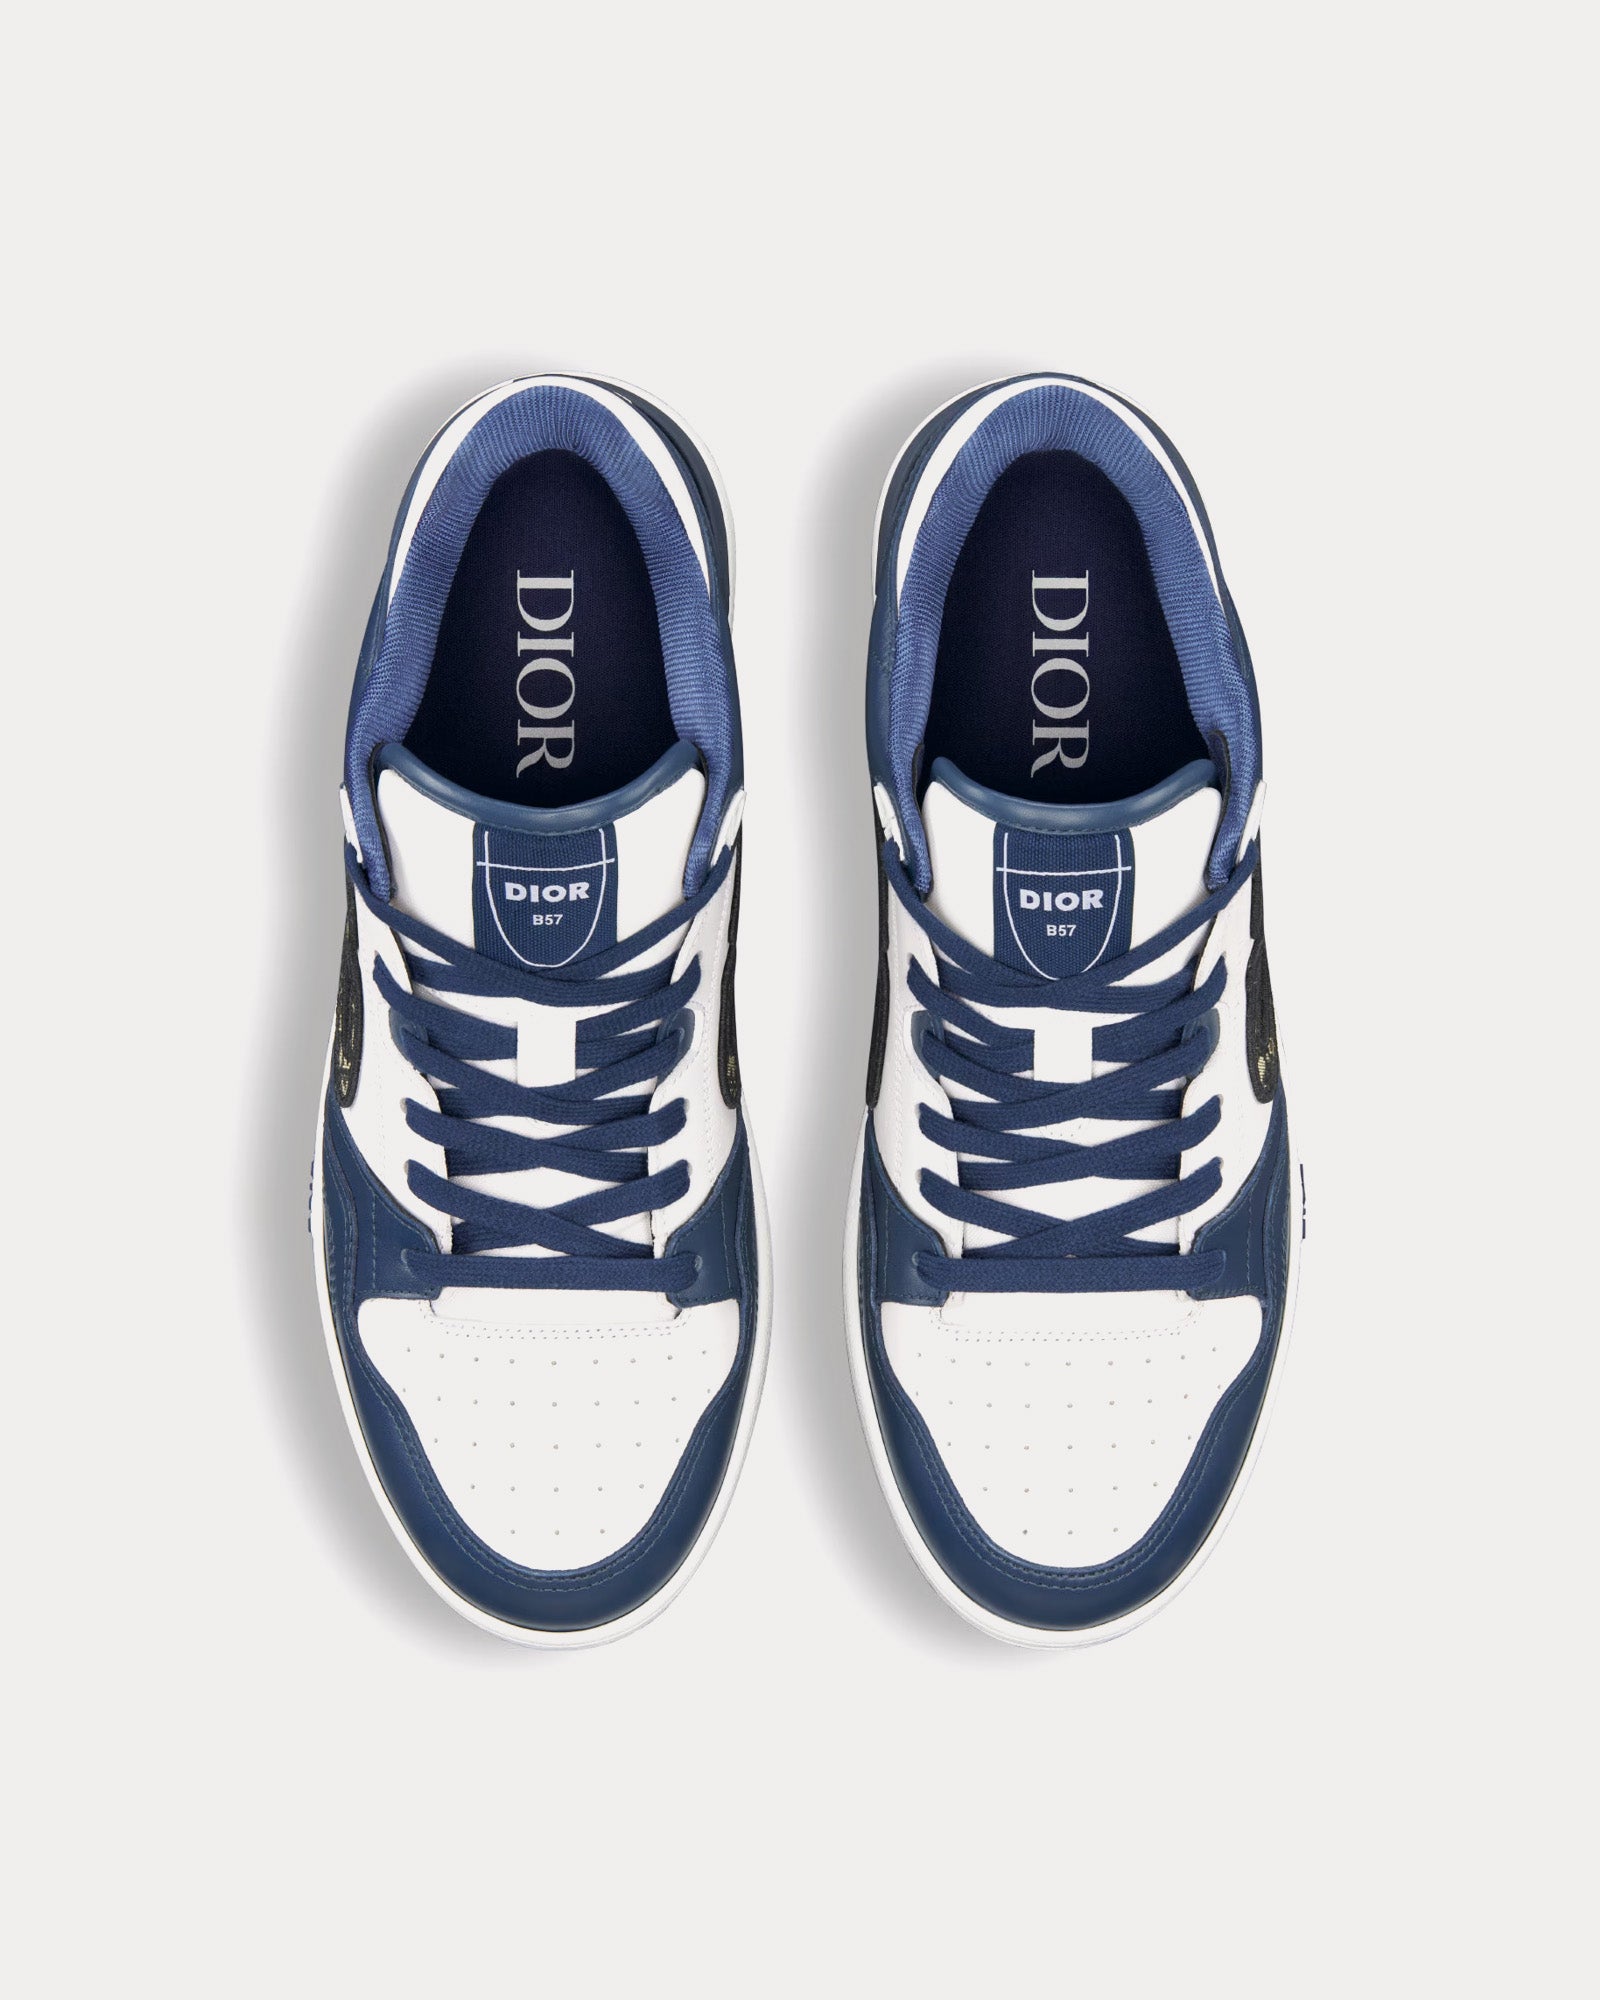 Dior - B57 Navy Blue and White Smooth Calfskin with Beige and Black Dior Oblique Jacquard Low Top Sneakers